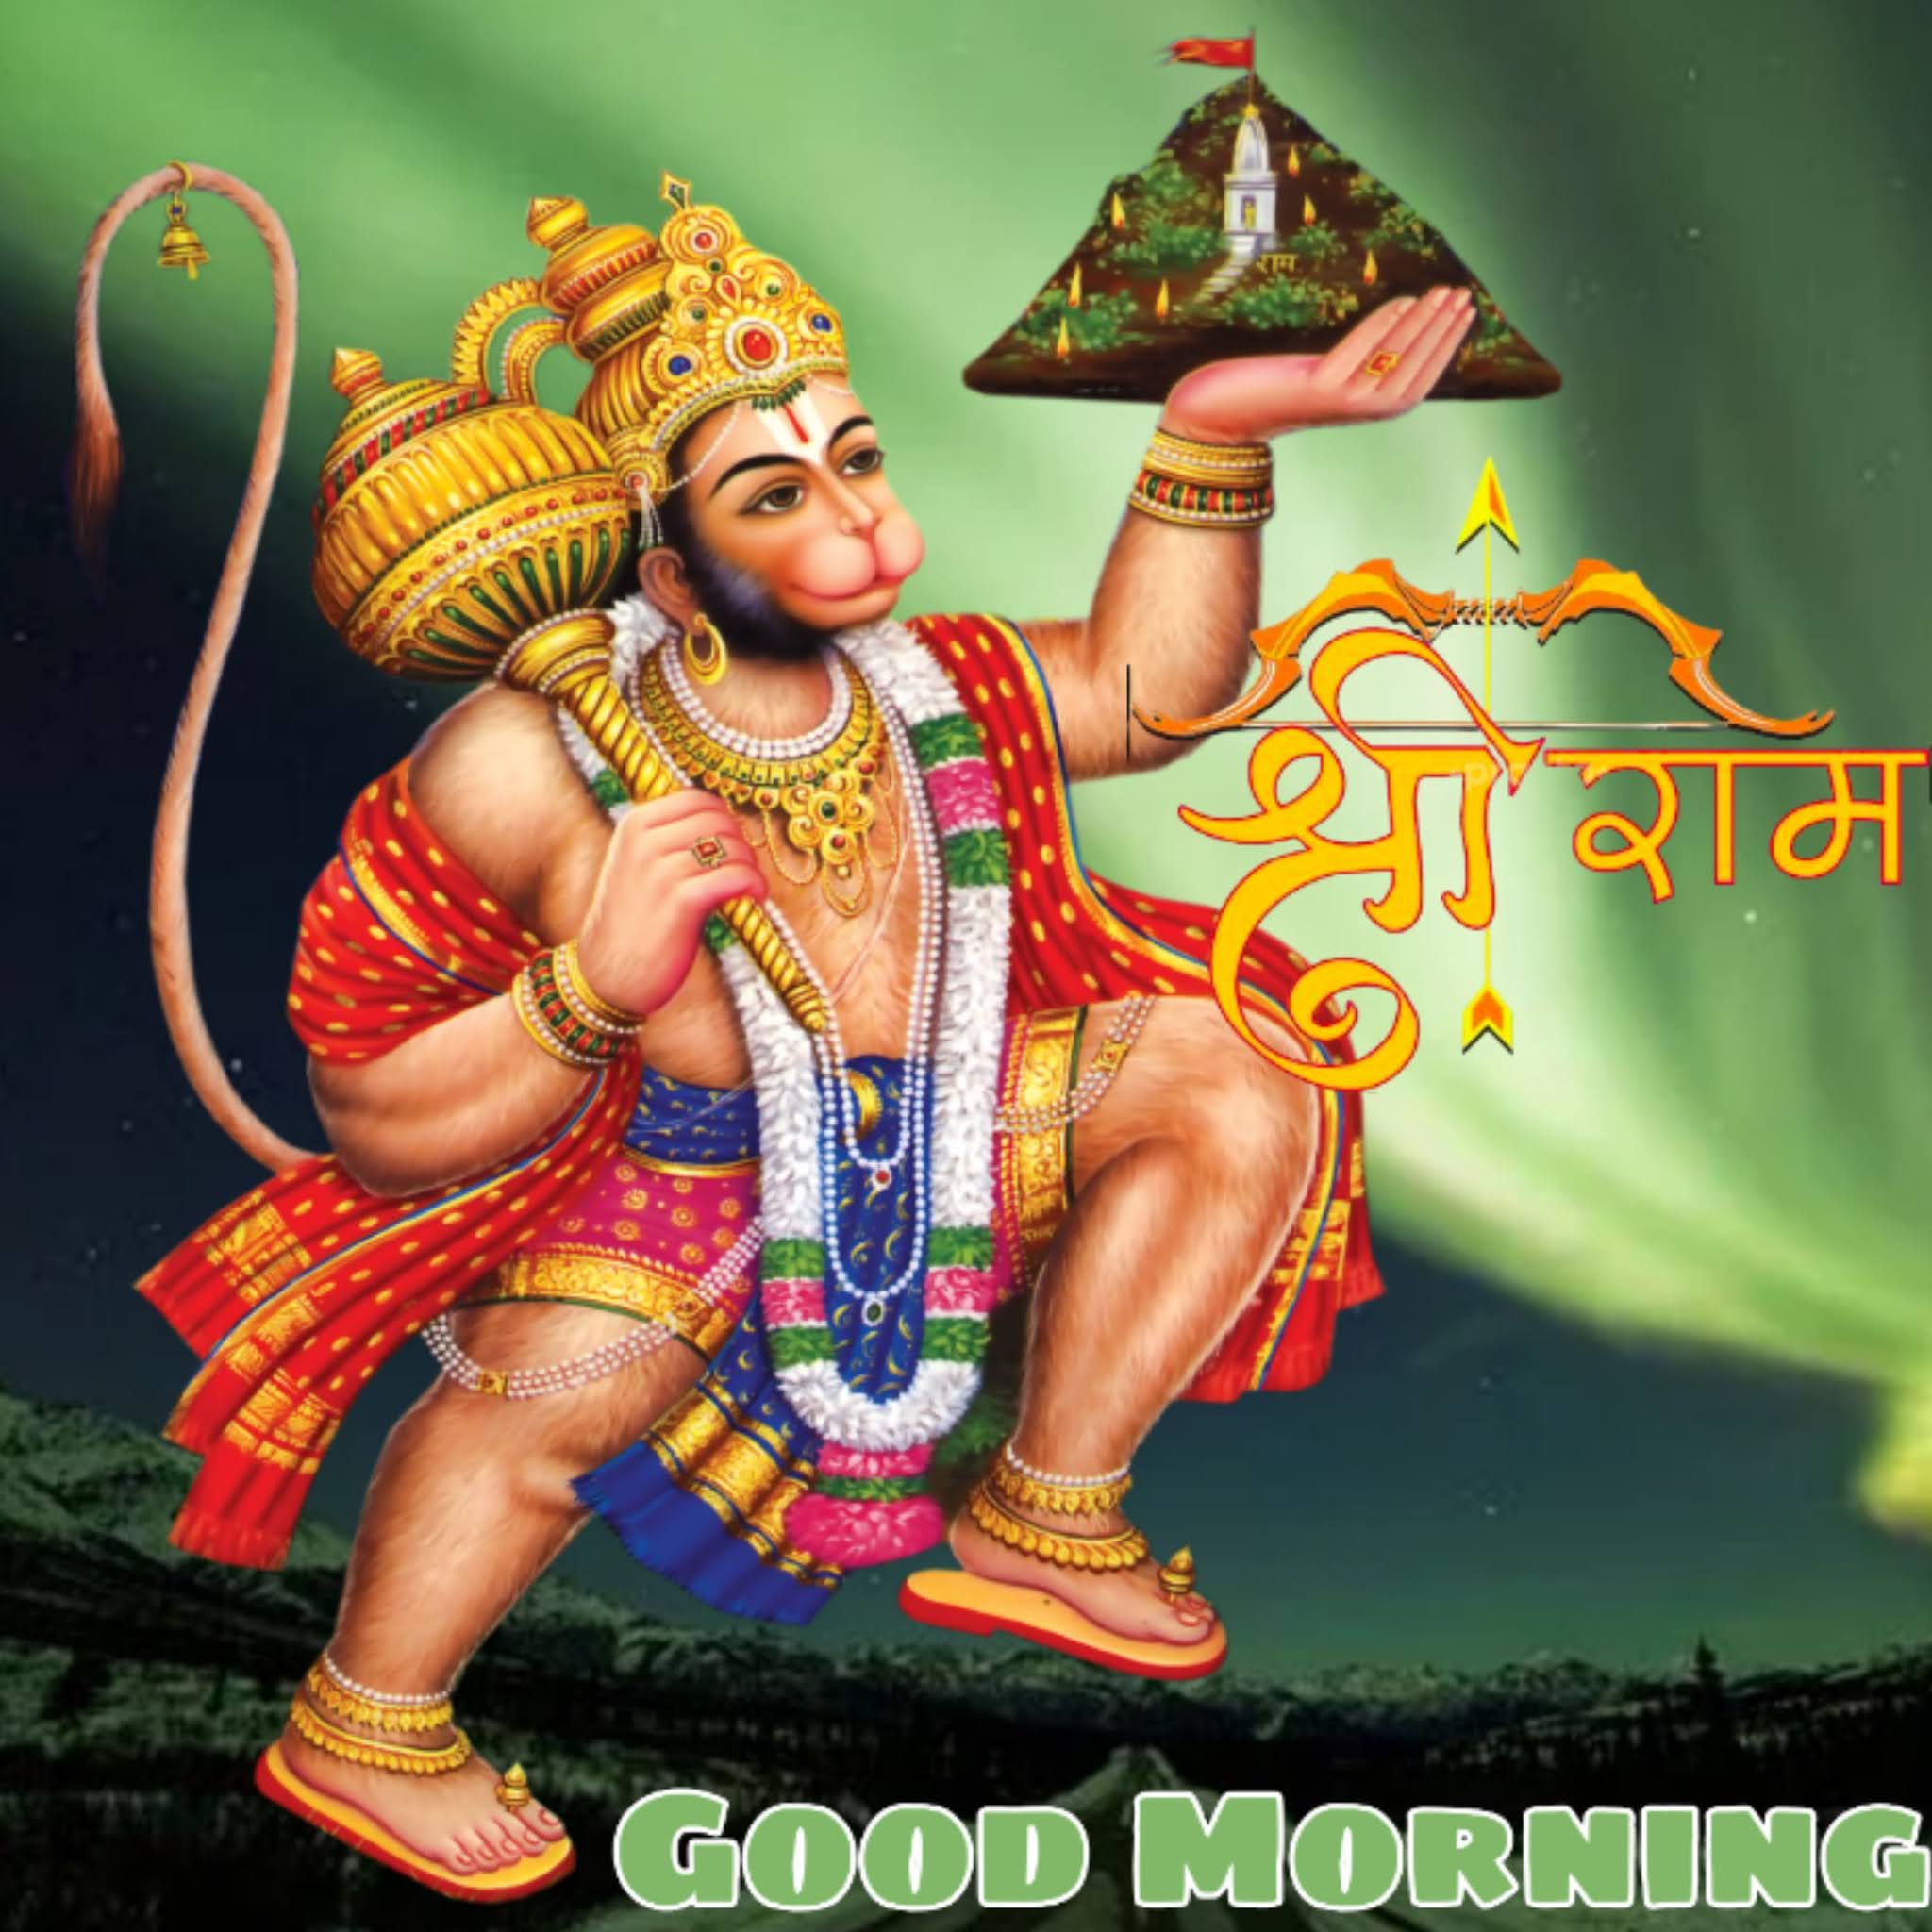 65 Happy Tuesday Good Morning Lord Hanuman Images Free Download Best Wishes Image